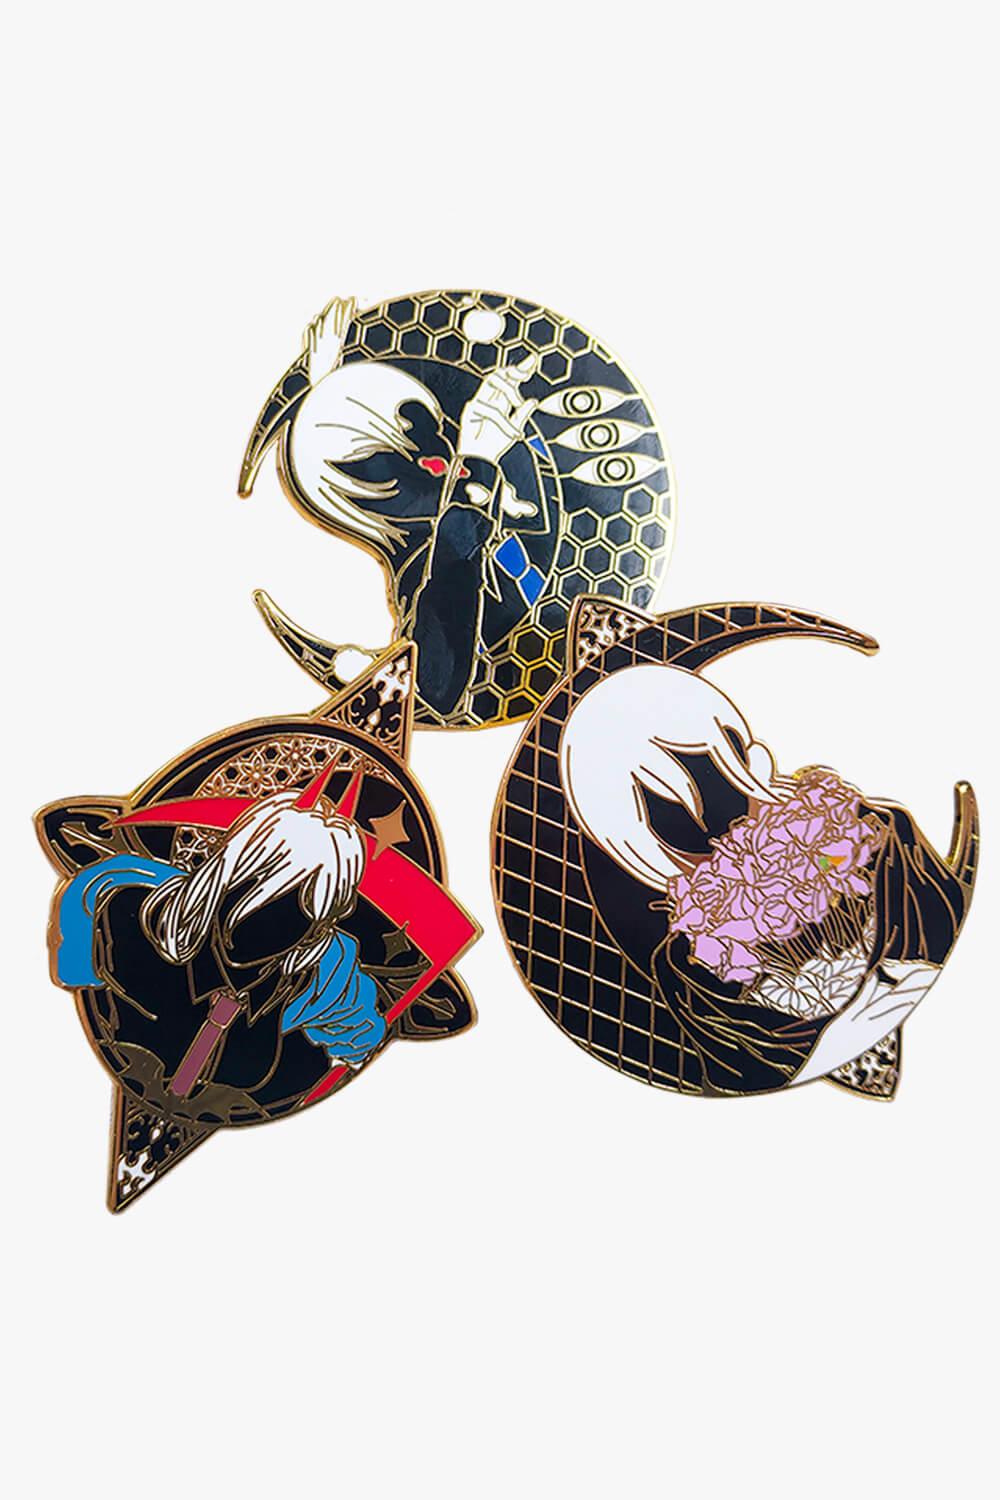 Chainsaw Man Crescent Moon Metal Badge Pins - Aesthetic Clothes Shop